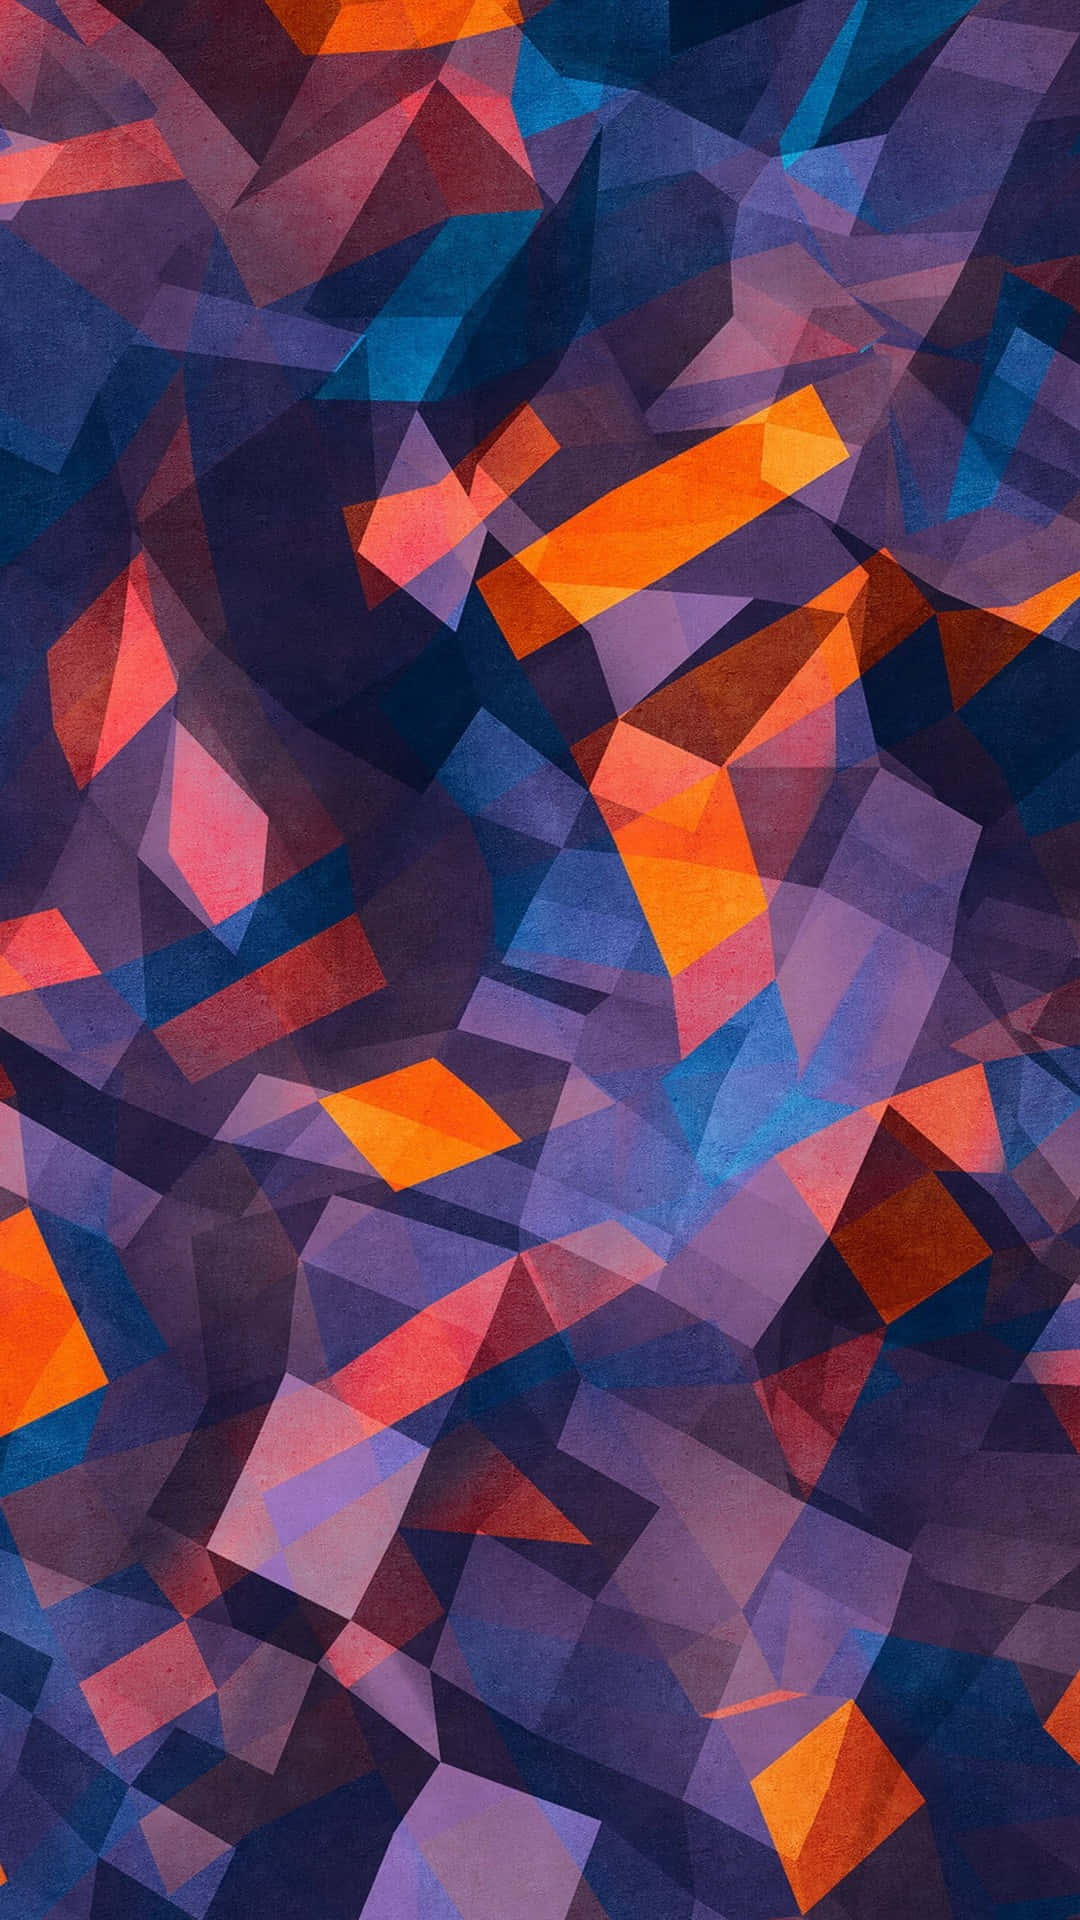 Express Yourself with the Geometric Iphone Wallpaper